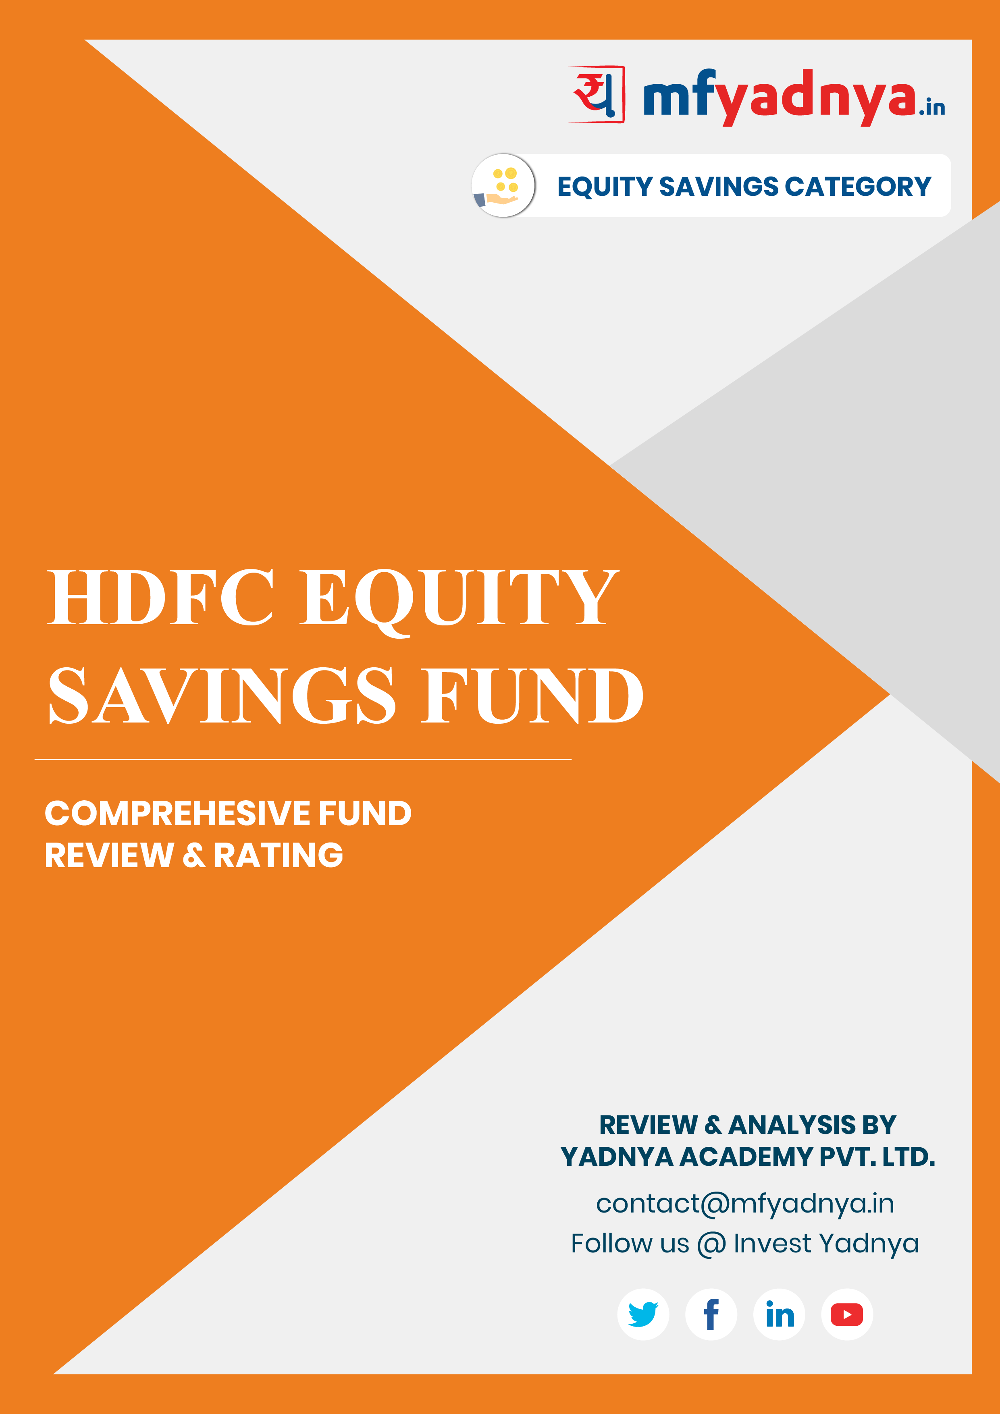 This e-book offers a comprehensive mutual fund review of HDFC Equity Savings Fund. It reviews the fund's return, ratio, allocation etc. ✔ Detailed Mutual Fund Analysis ✔ Latest Research Reports